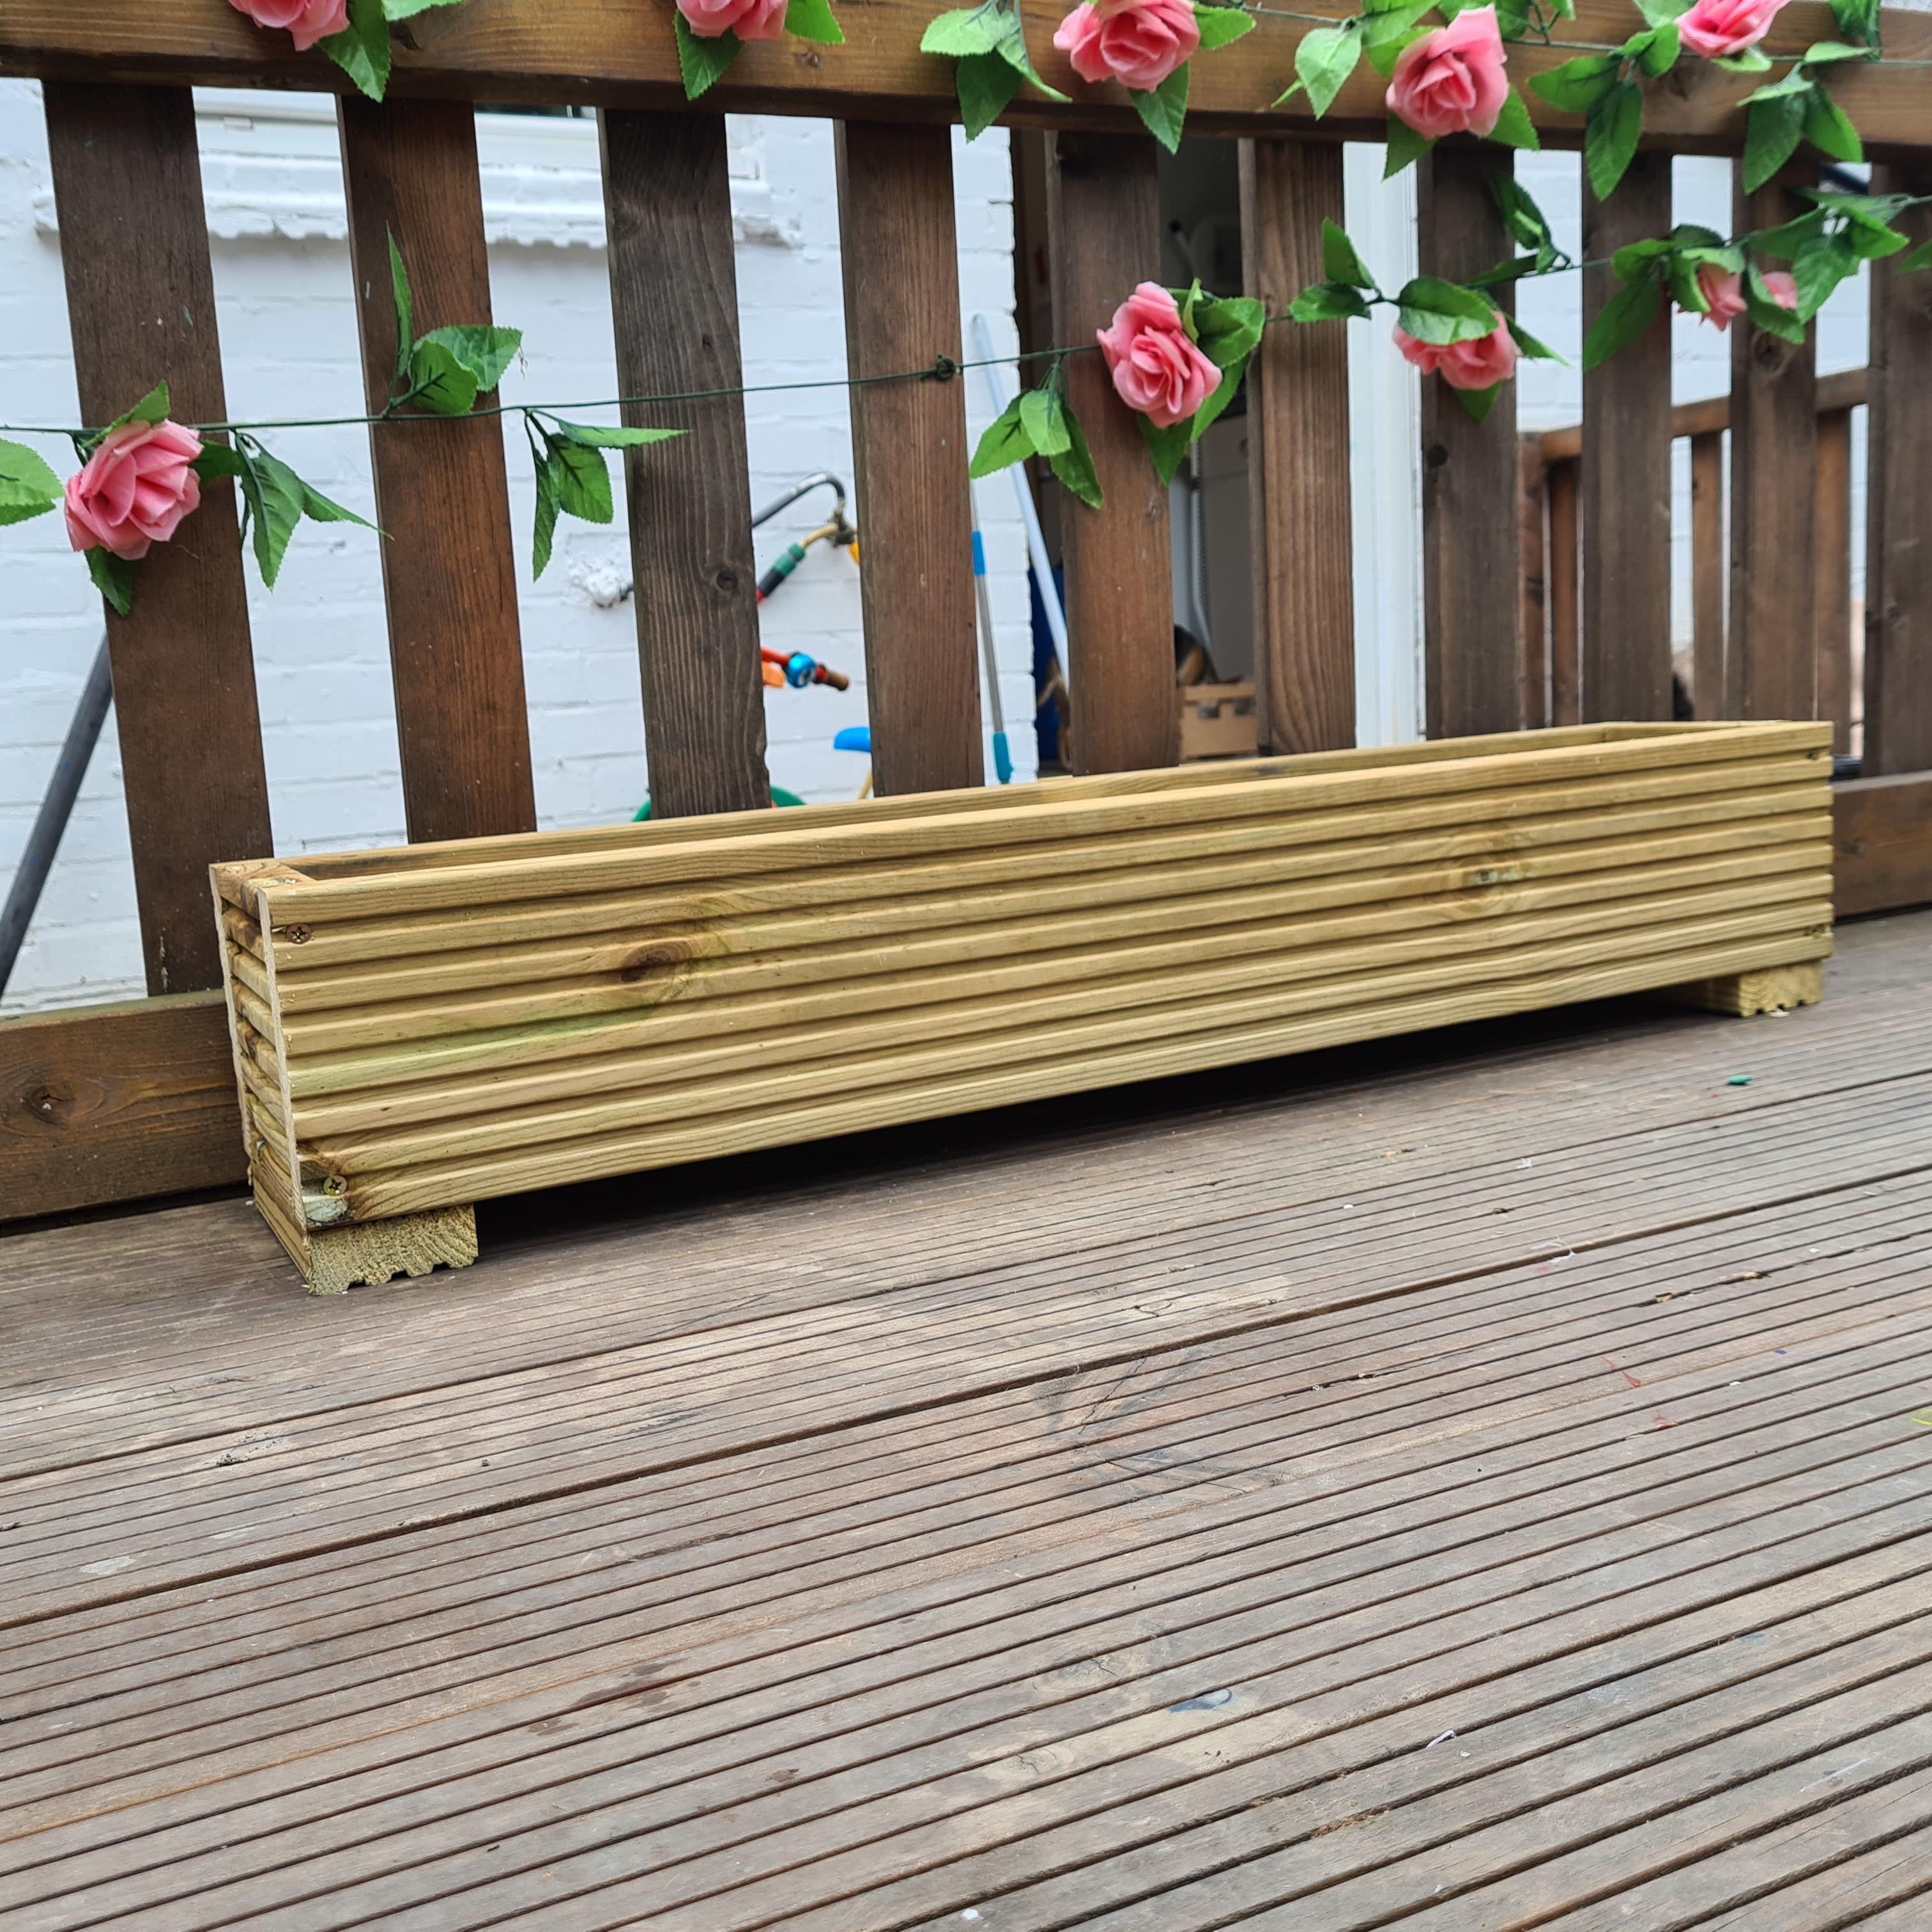 decking planter with picket fence in the background